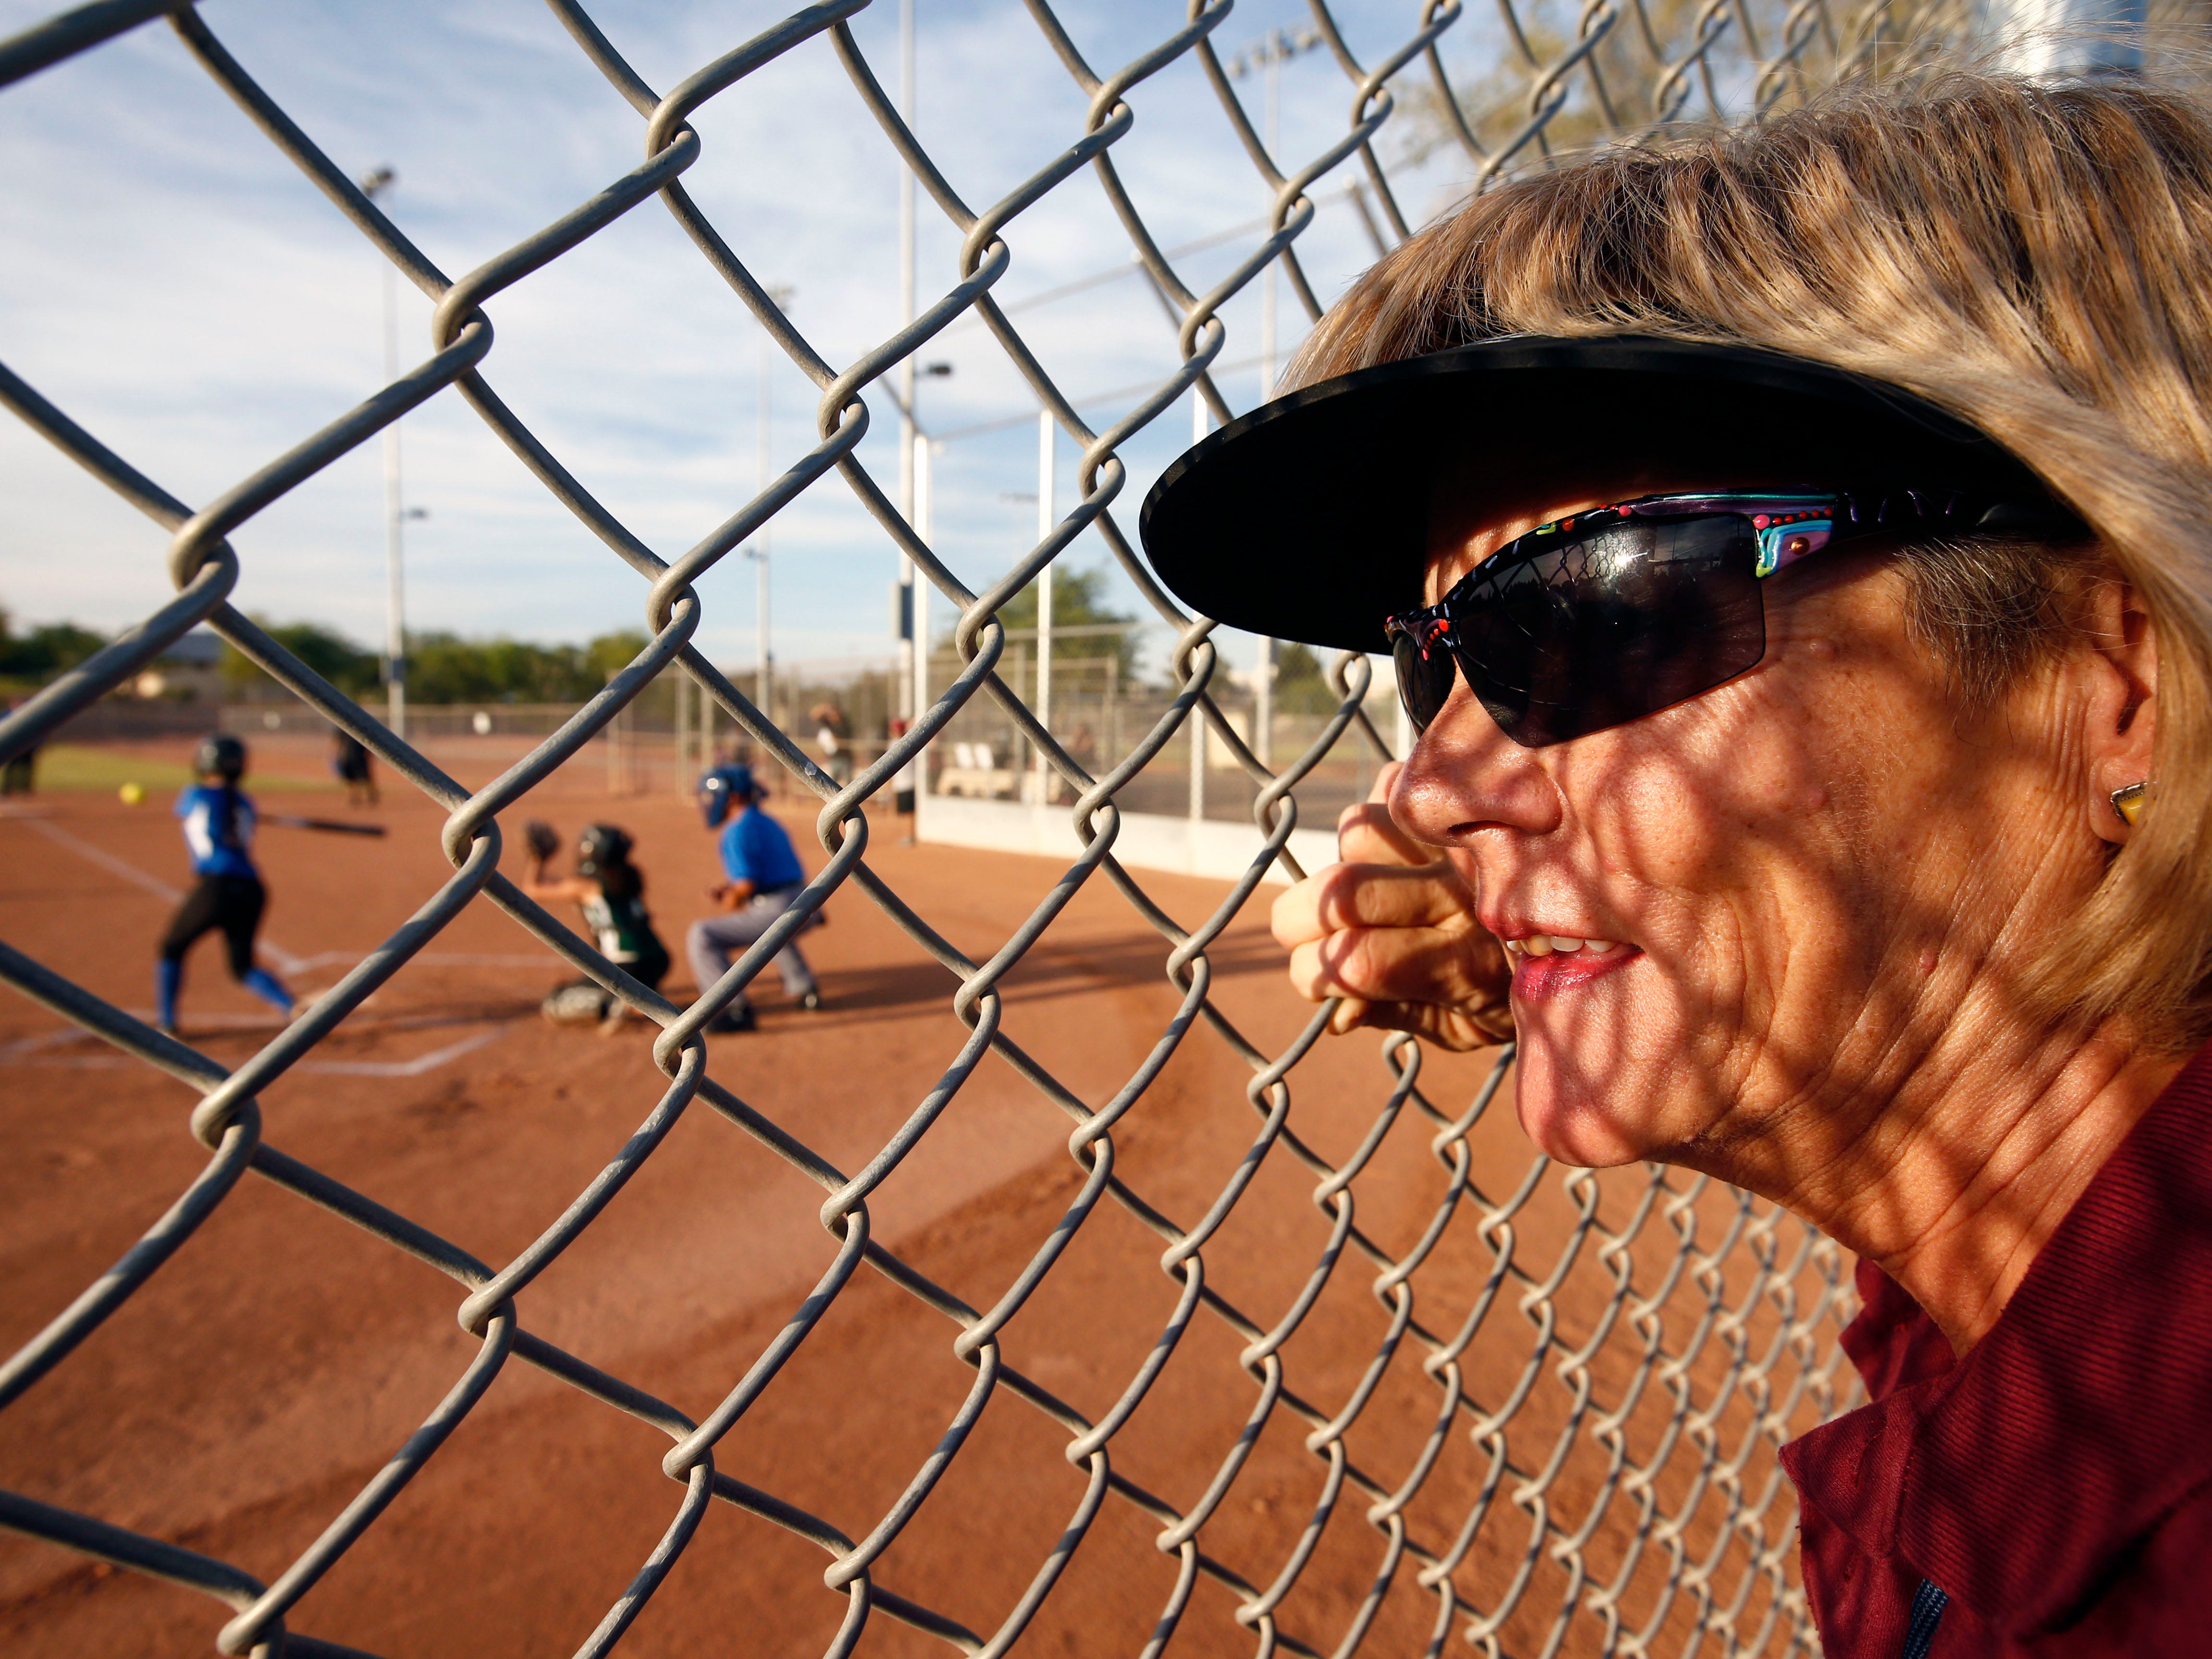 Tempe senior recreation coordinator Bobbi Jones says it’s common for younger girls to play baseball, but later they are steered toward softball.